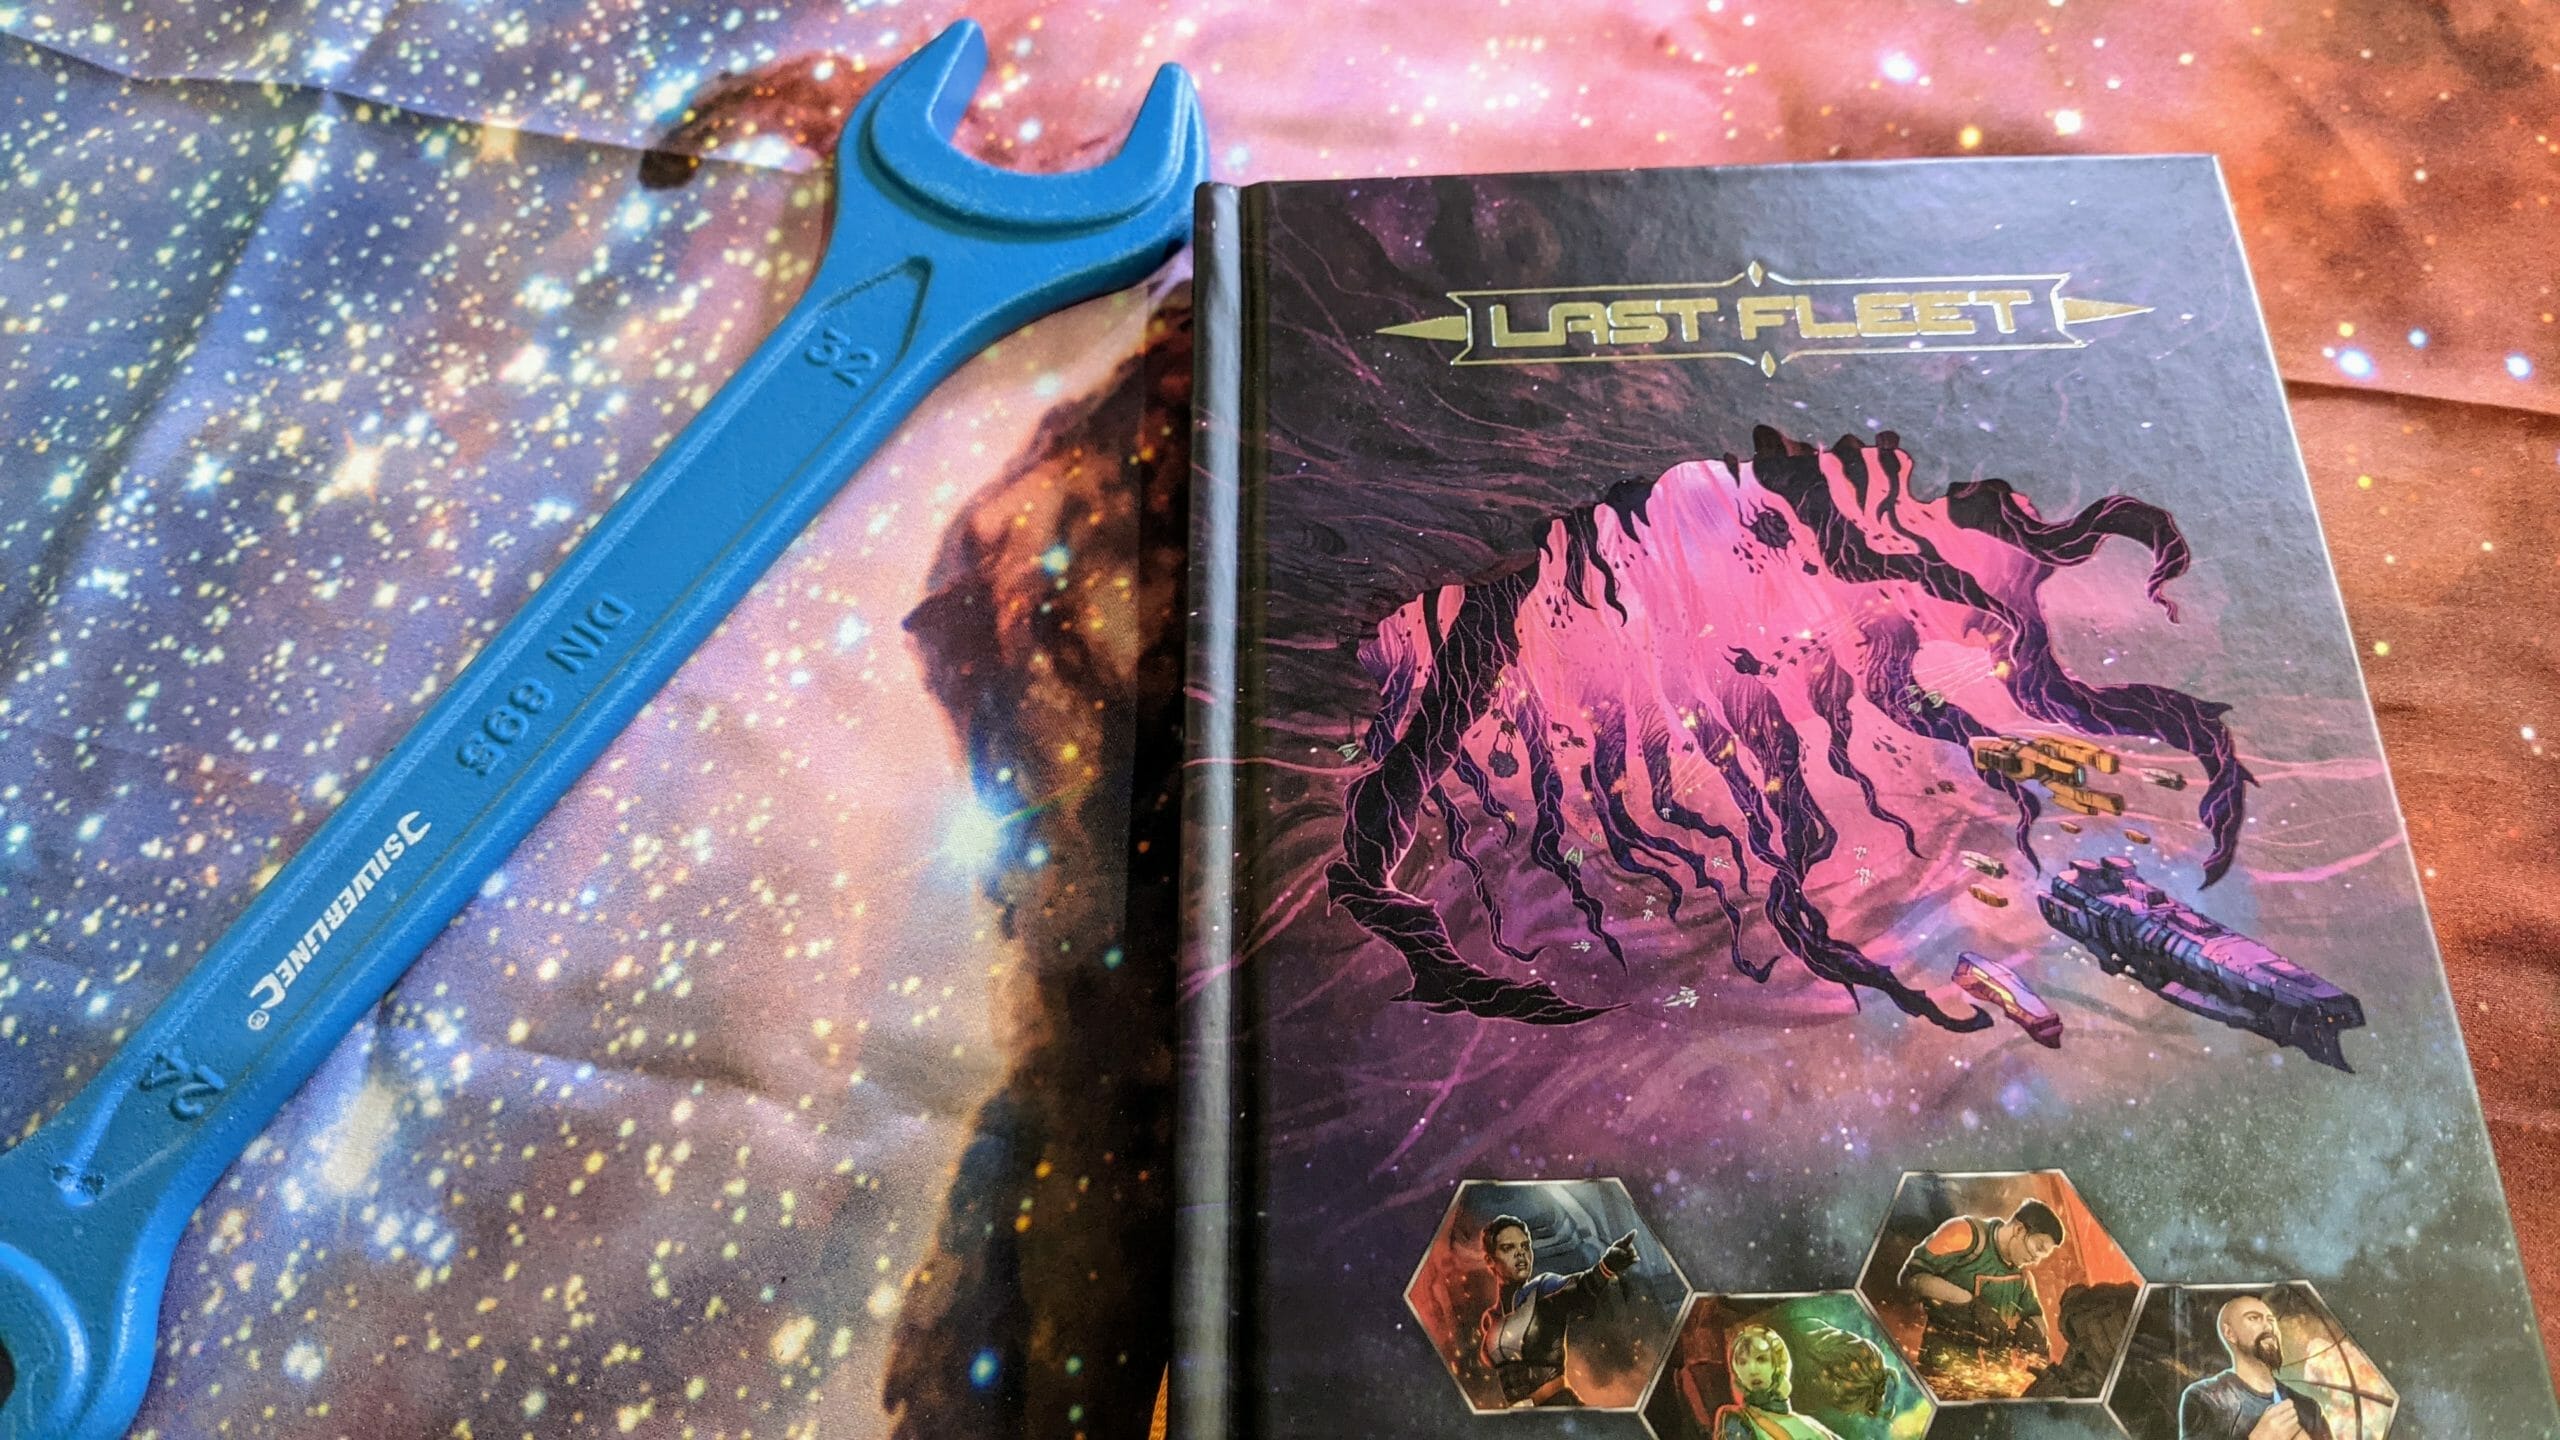 Under pressure sci-fi excellence: A review of Last Fleet